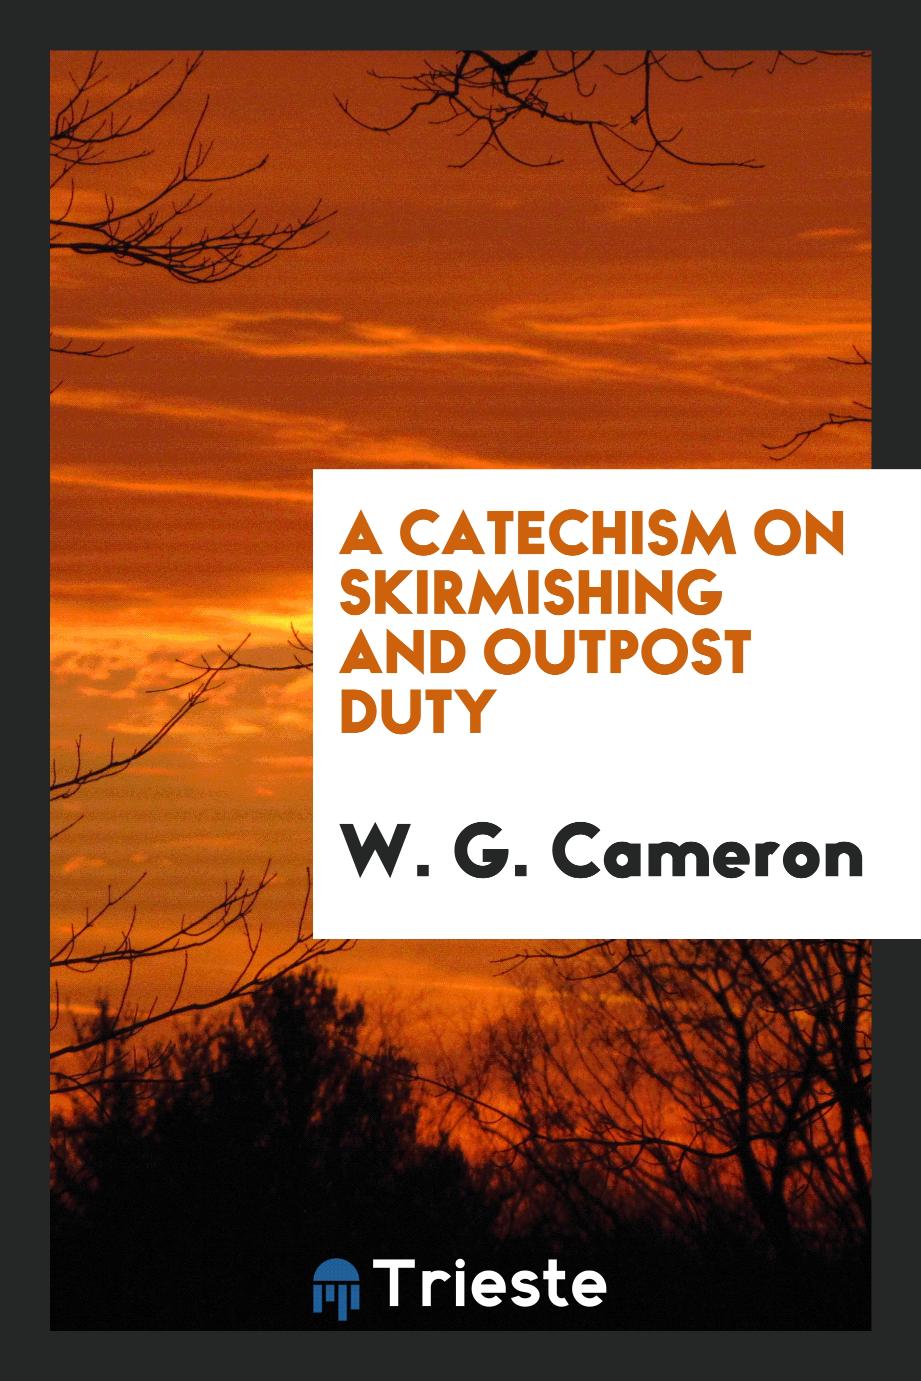 A Catechism on Skirmishing and Outpost Duty